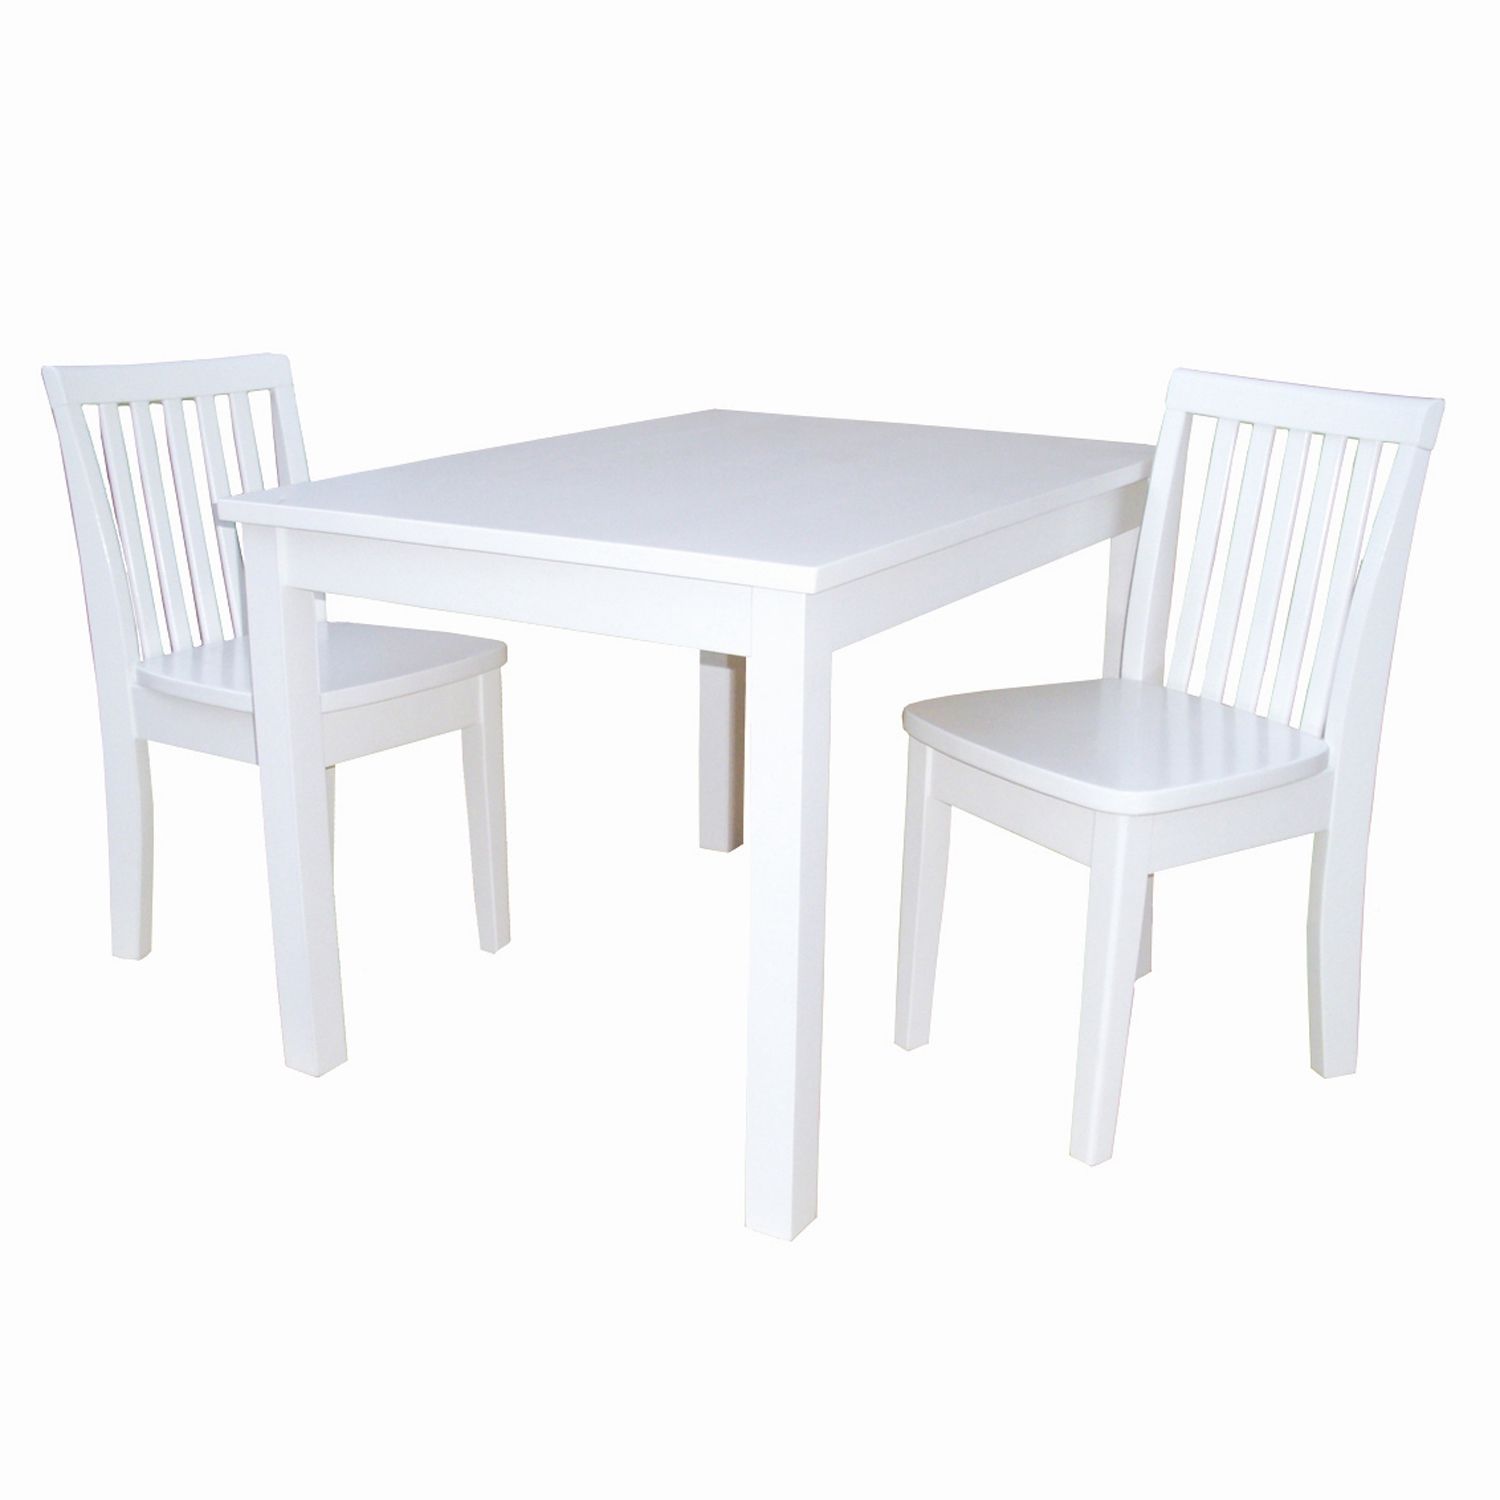 juvenile table and chair set